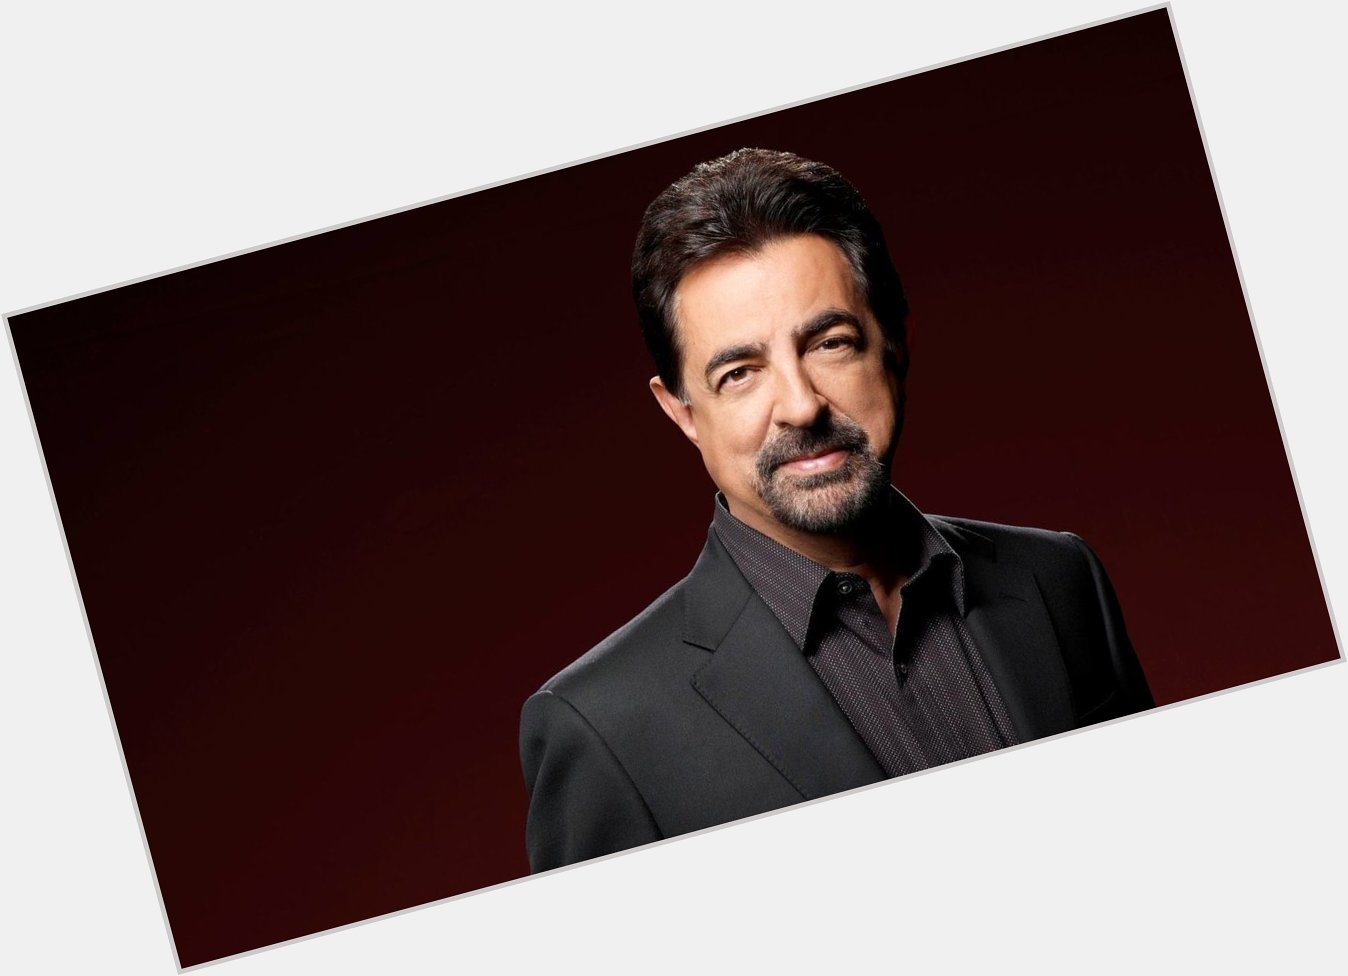 Happy Birthday to my dear friend Joe Mantegna! How did we get to This age?  